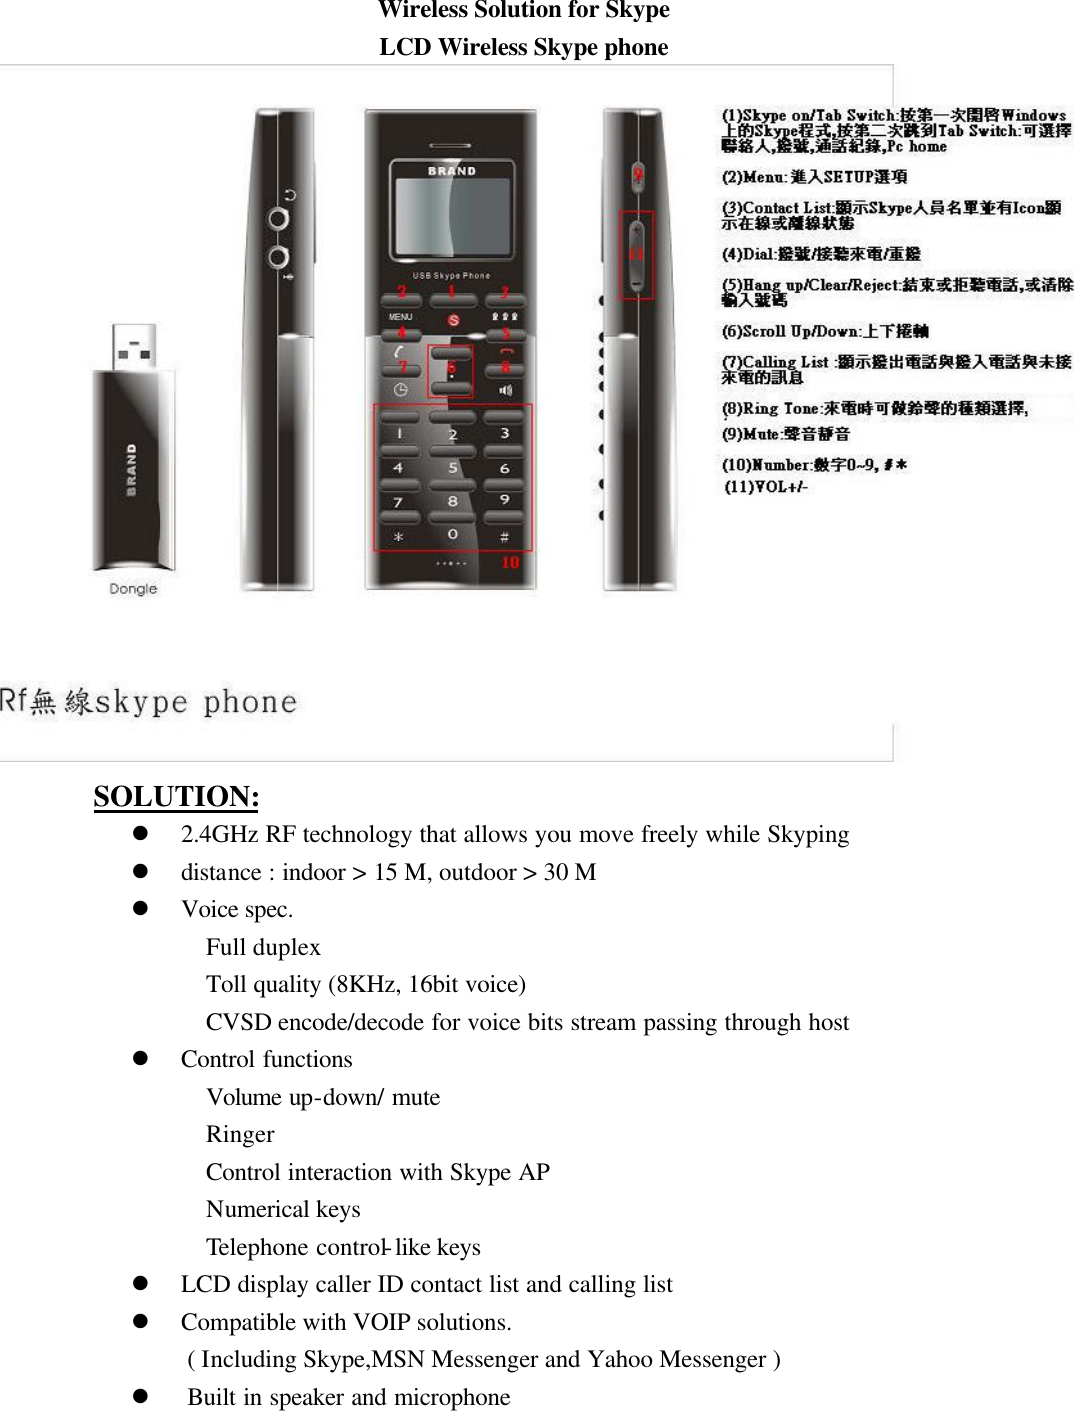 Wireless Solution for Skype LCD Wireless Skype phone                    SOLUTION: l 2.4GHz RF technology that allows you move freely while Skyping l distance : indoor &gt; 15 M, outdoor &gt; 30 M l Voice spec. Full duplex Toll quality (8KHz, 16bit voice) CVSD encode/decode for voice bits stream passing through host l Control functions Volume up-down/ mute Ringer Control interaction with Skype AP Numerical keys Telephone control-like keys l LCD display caller ID contact list and calling list l Compatible with VOIP solutions. ( Including Skype,MSN Messenger and Yahoo Messenger ) l Built in speaker and microphone 